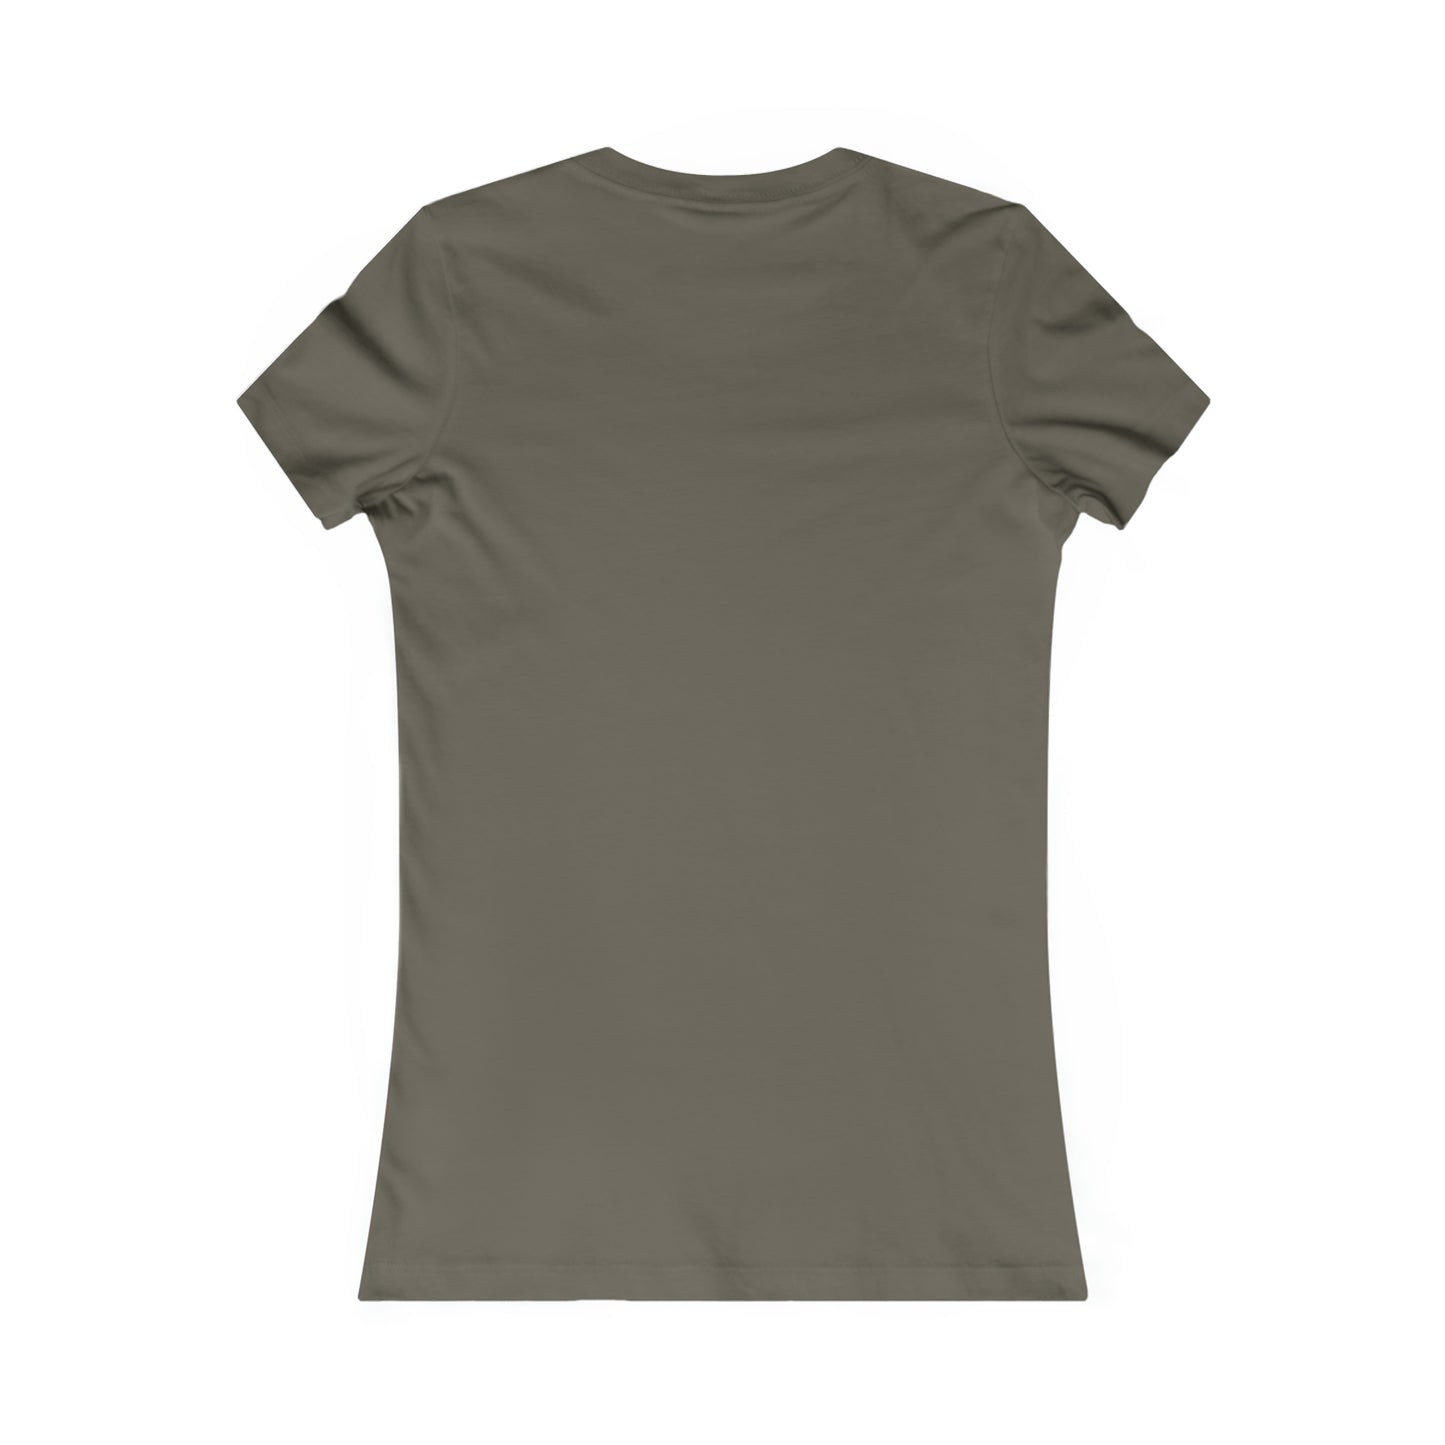 Tipping Points SF Women's Favorite Tee